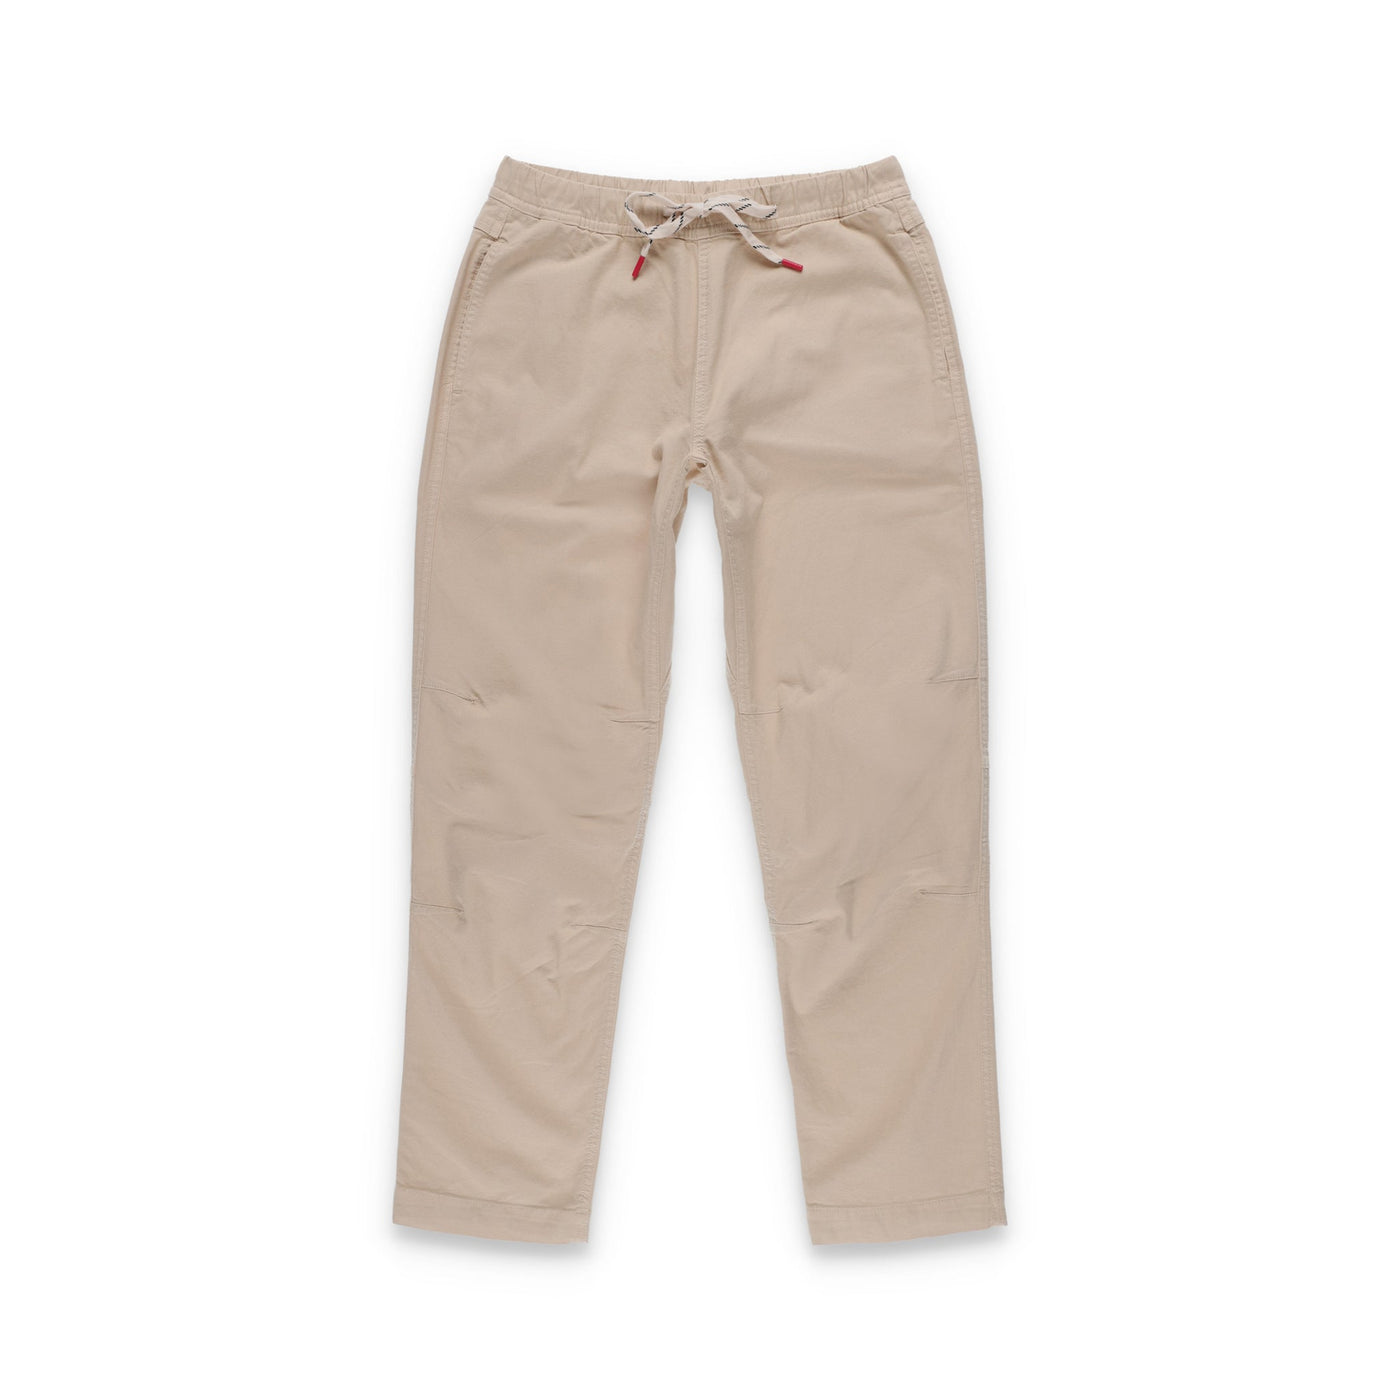 Topo Designs Women's Dirt Pants in 100% organic cotton with drawstring waist in "Sand" white